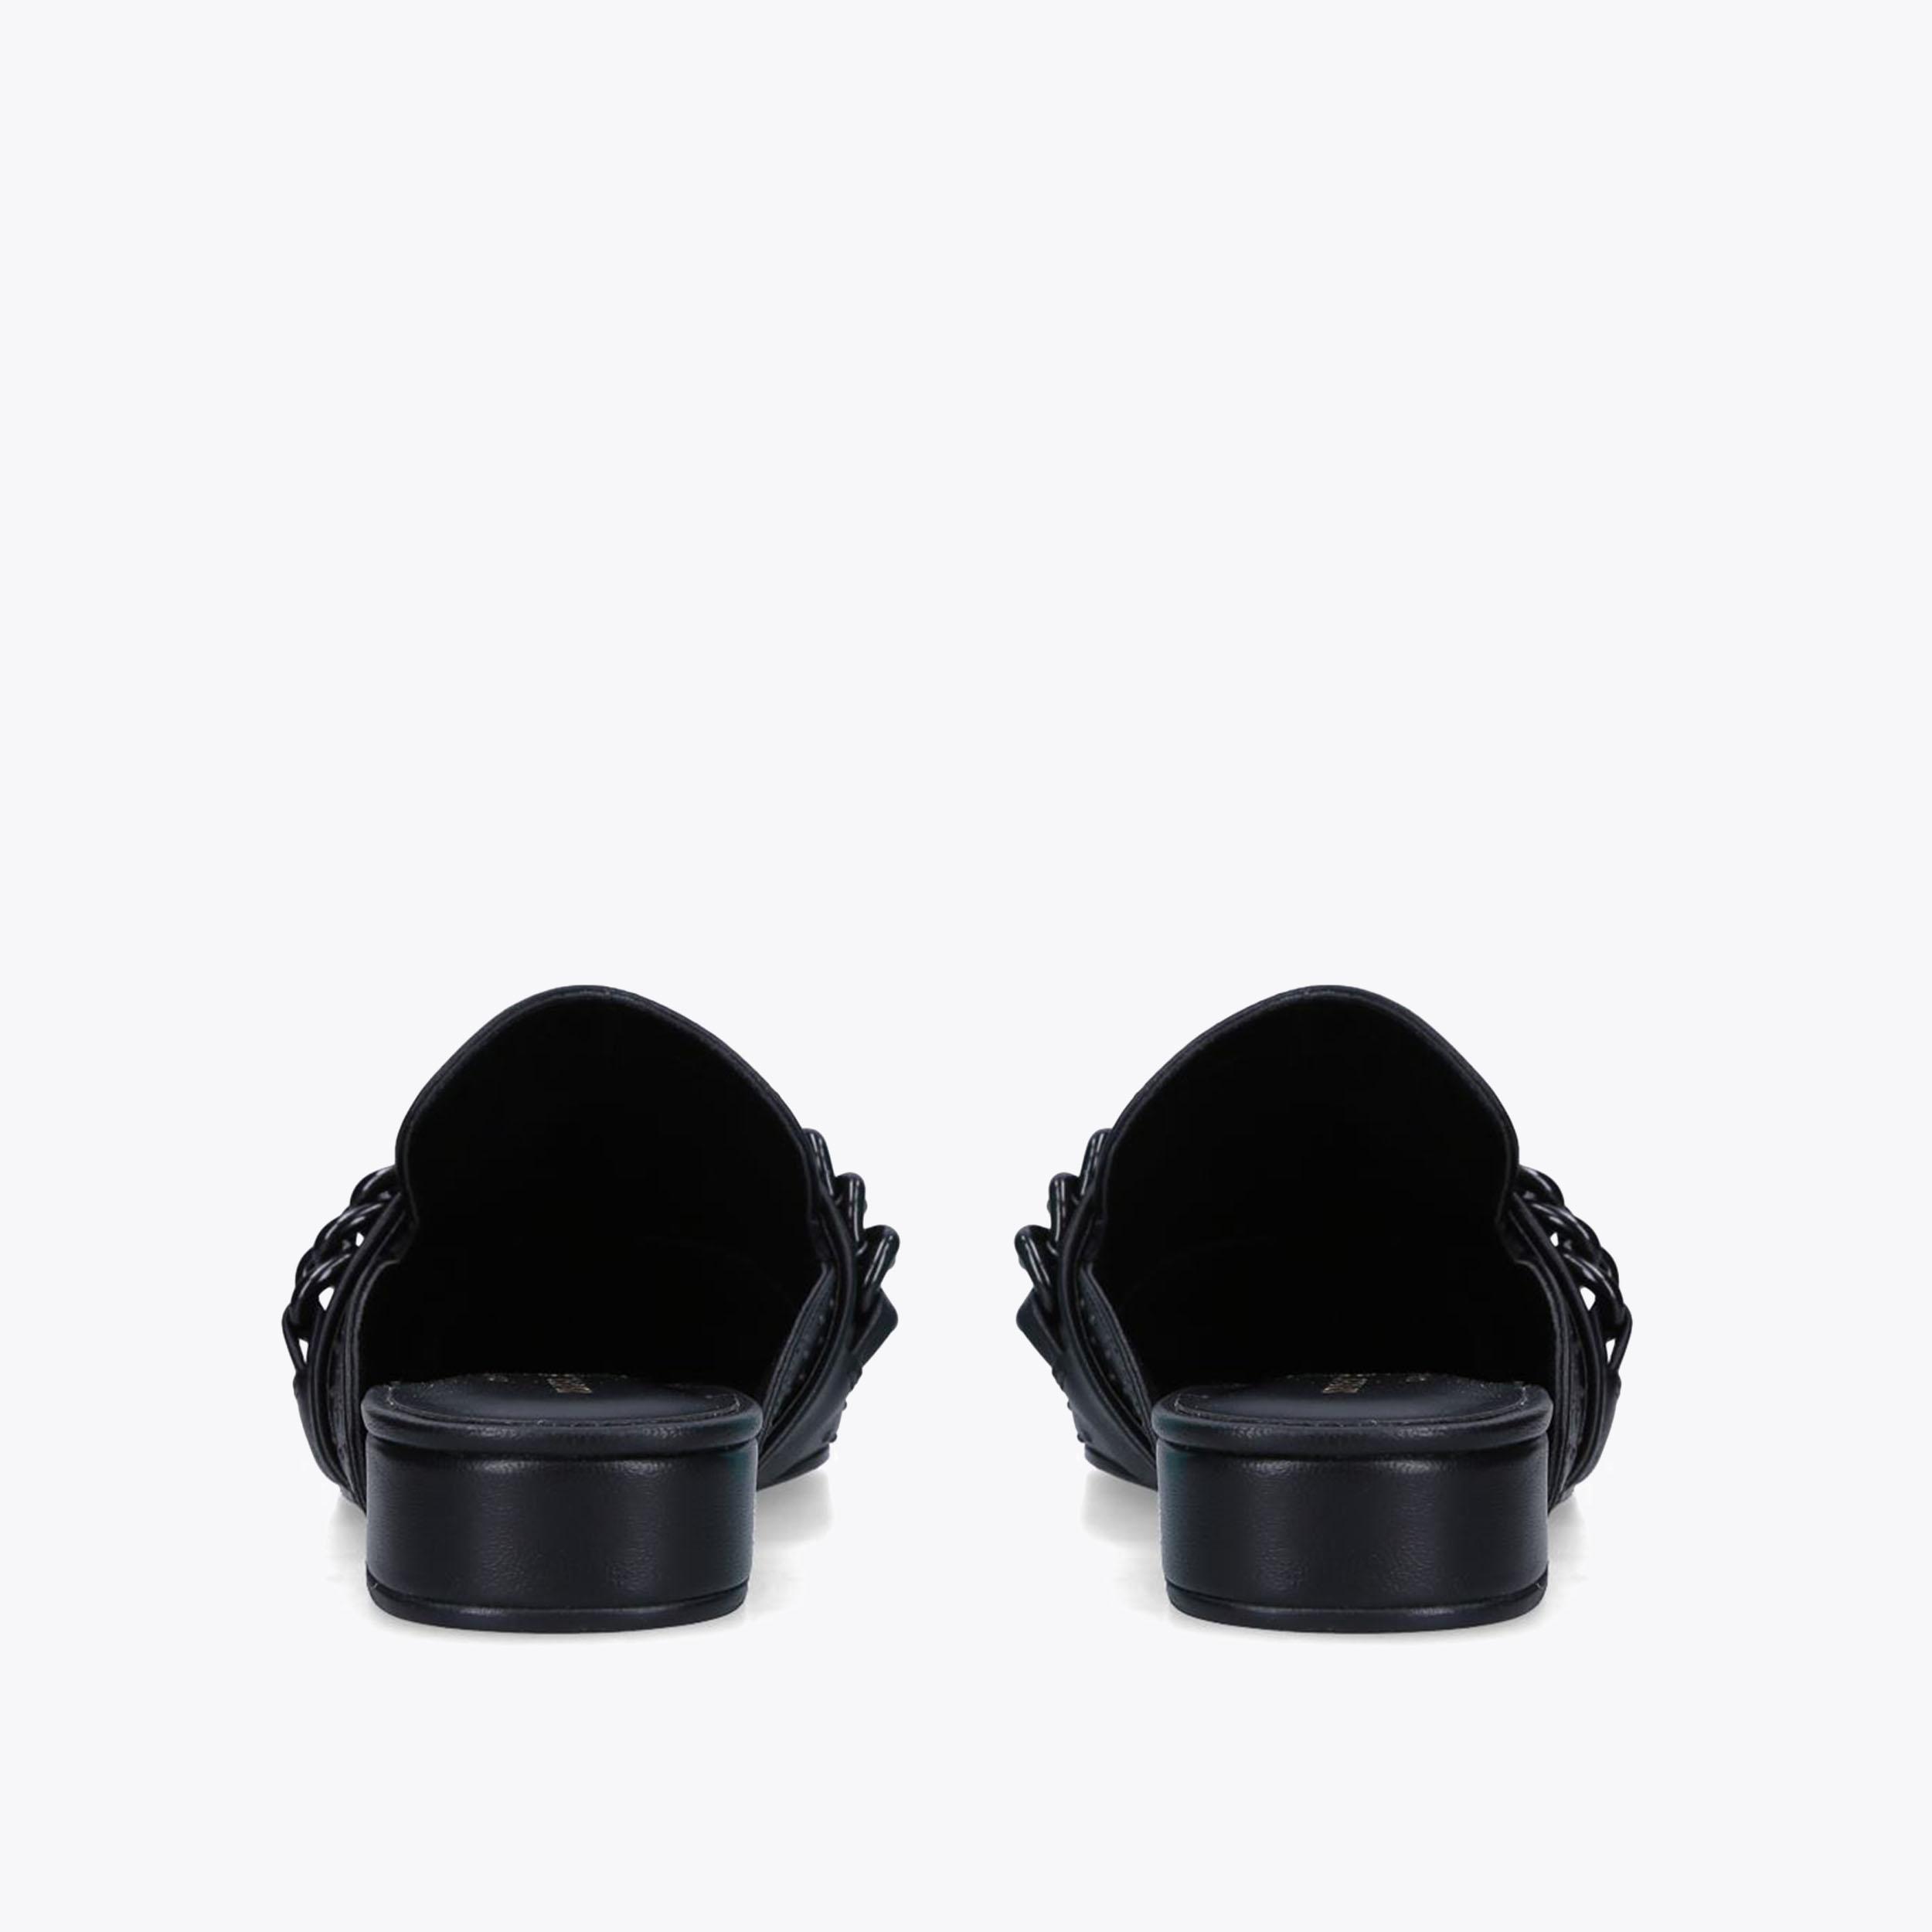 CHELSEA BLACK LEATHER STUDDED MULE DRENCH by KURT GEIGER LONDON